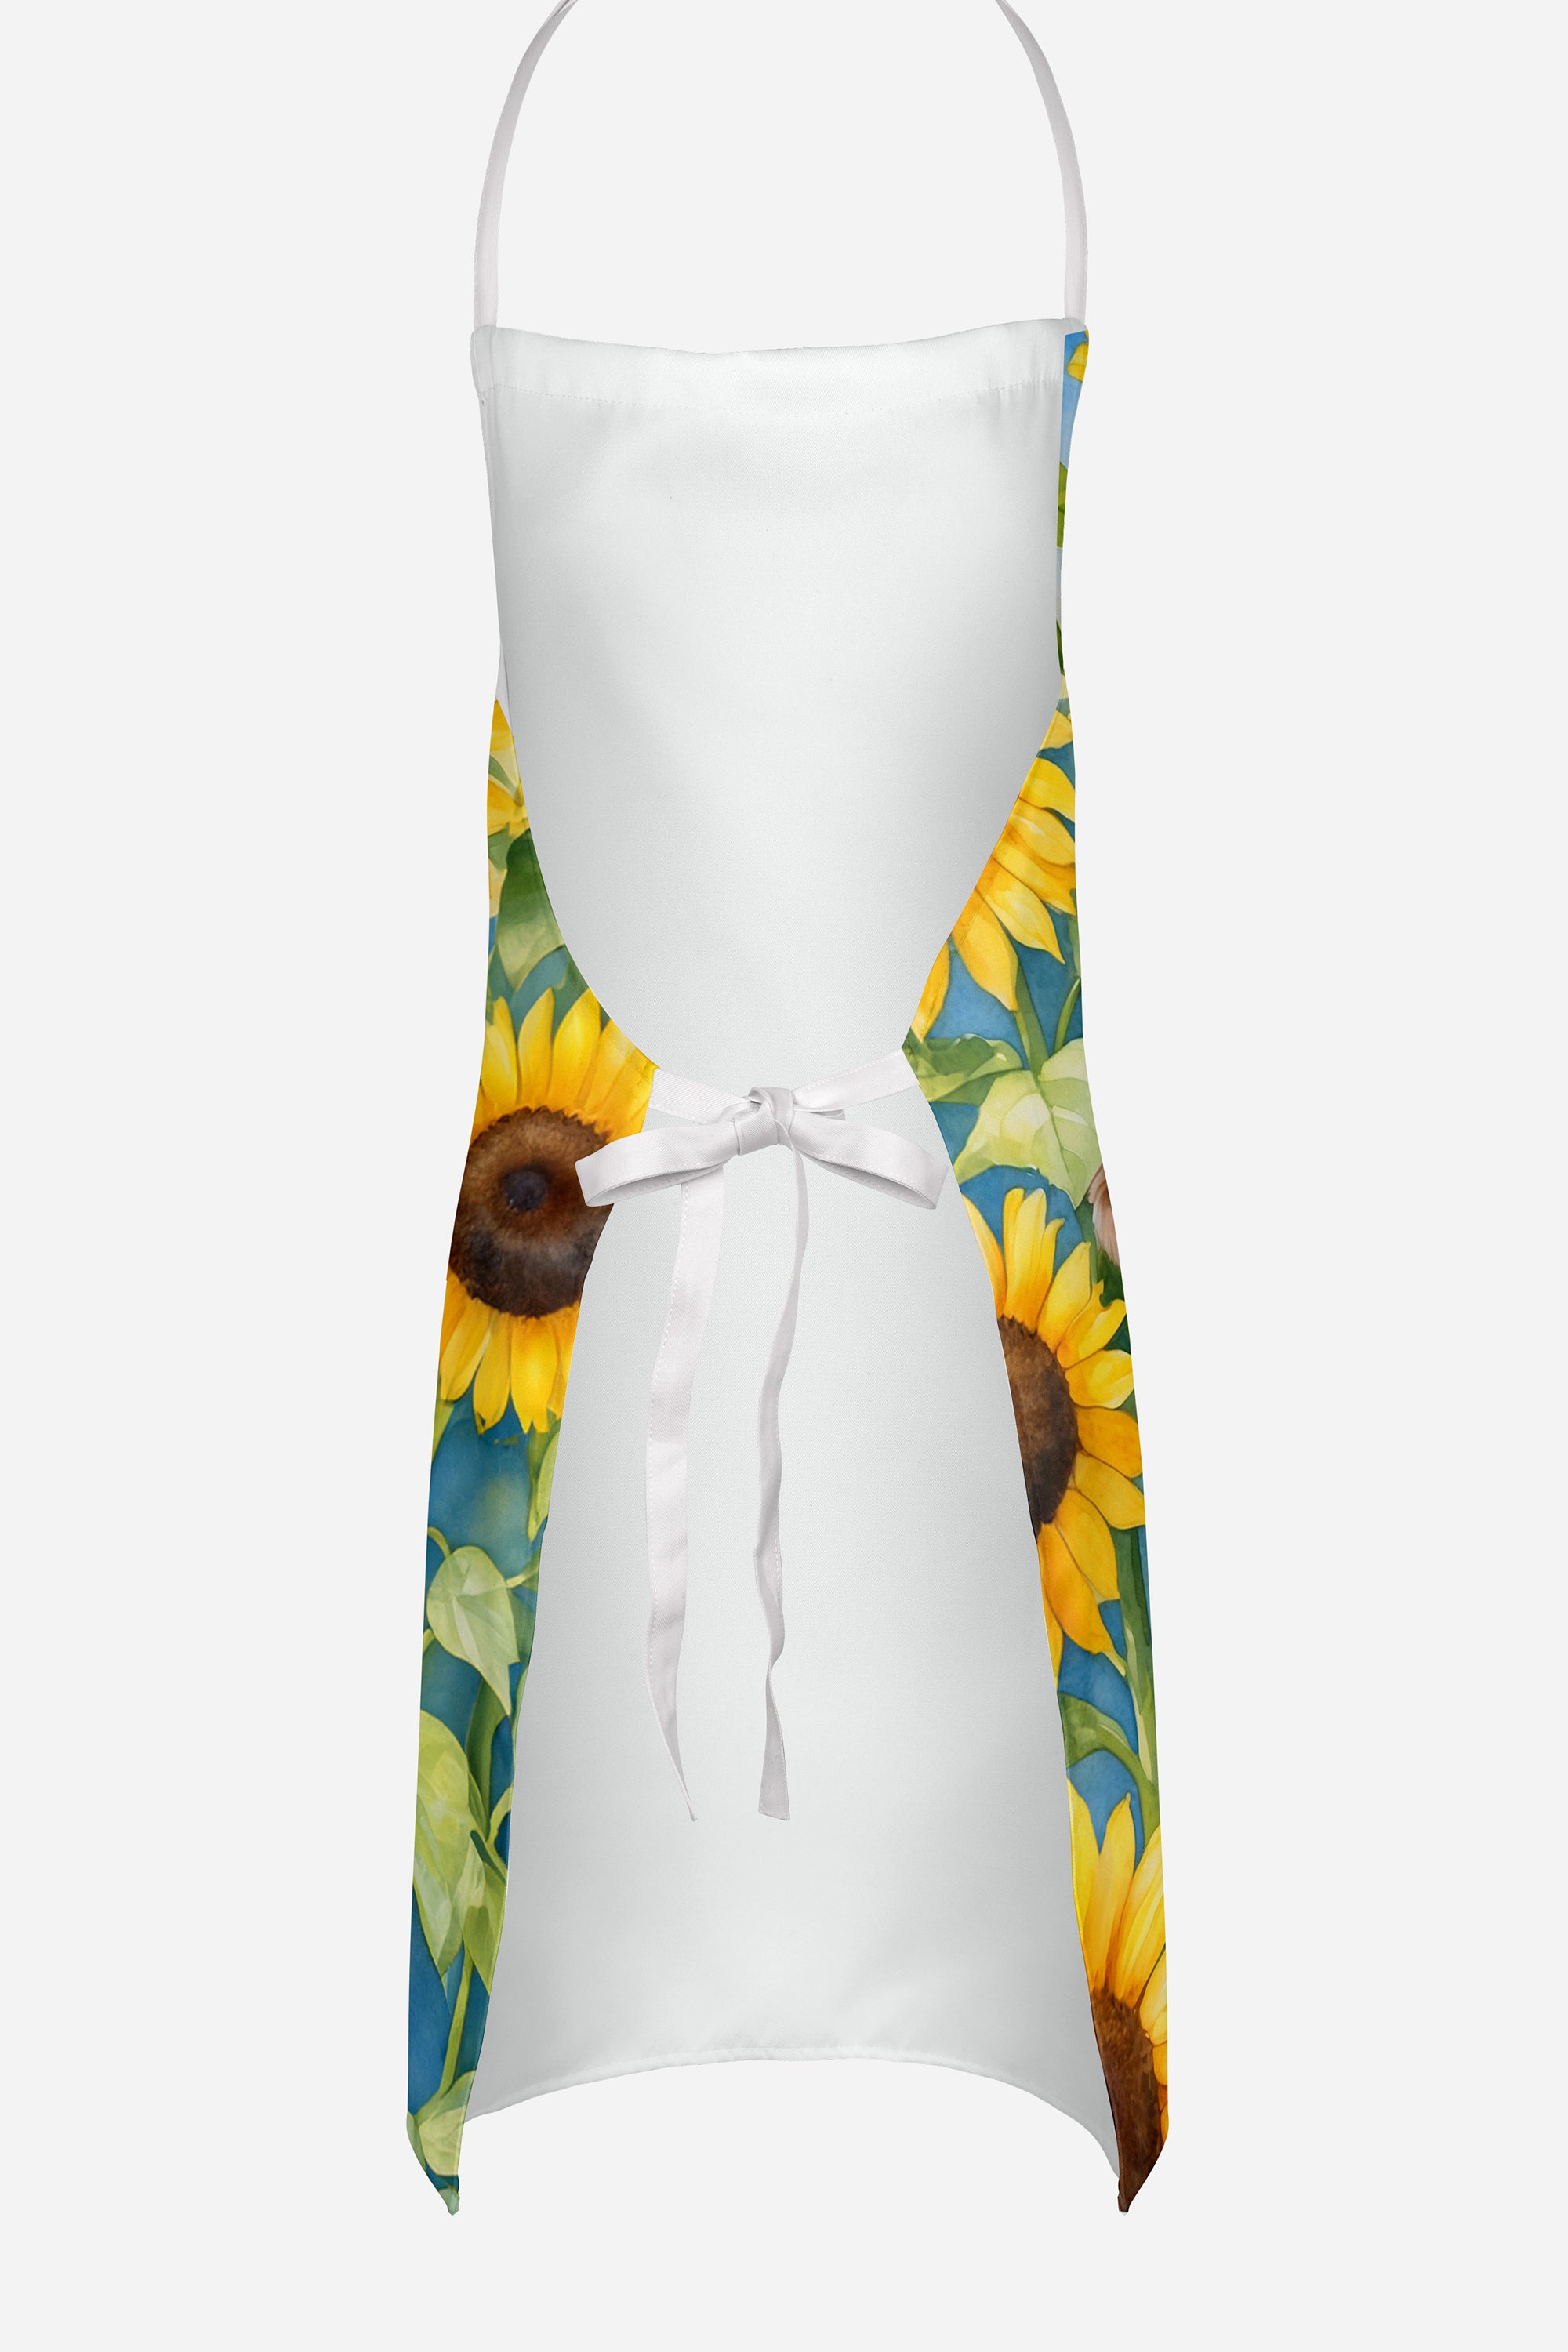 German Wirehaired Pointer in Sunflowers Apron